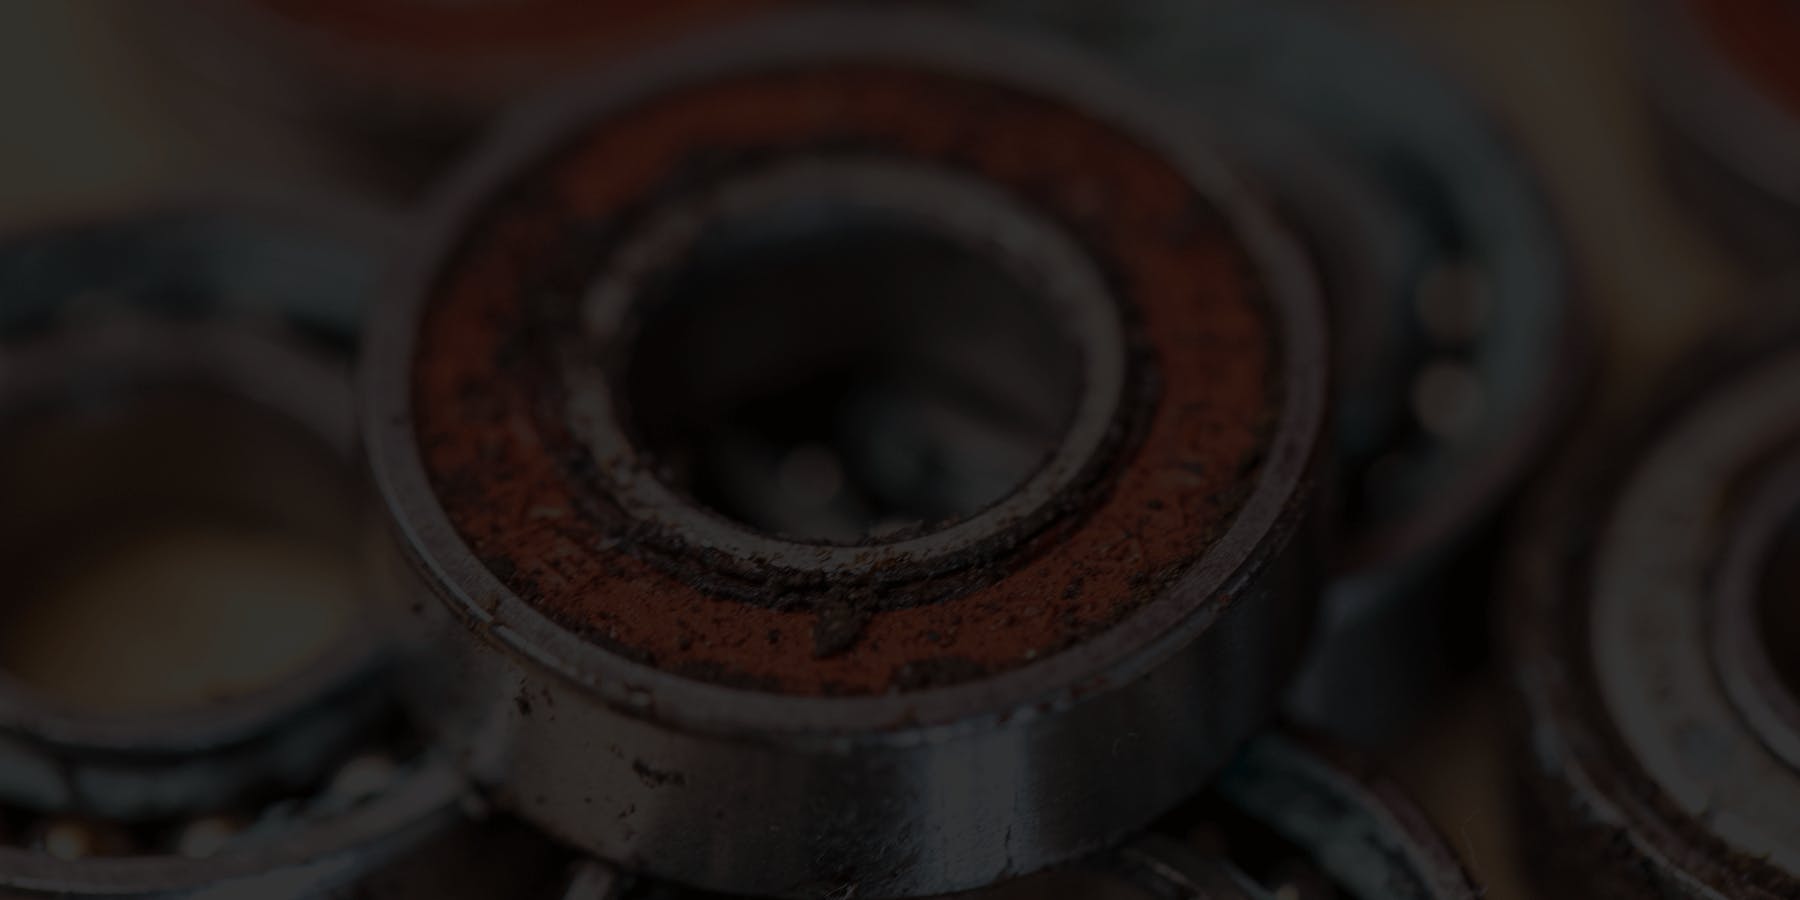 A bearing covered in dirt